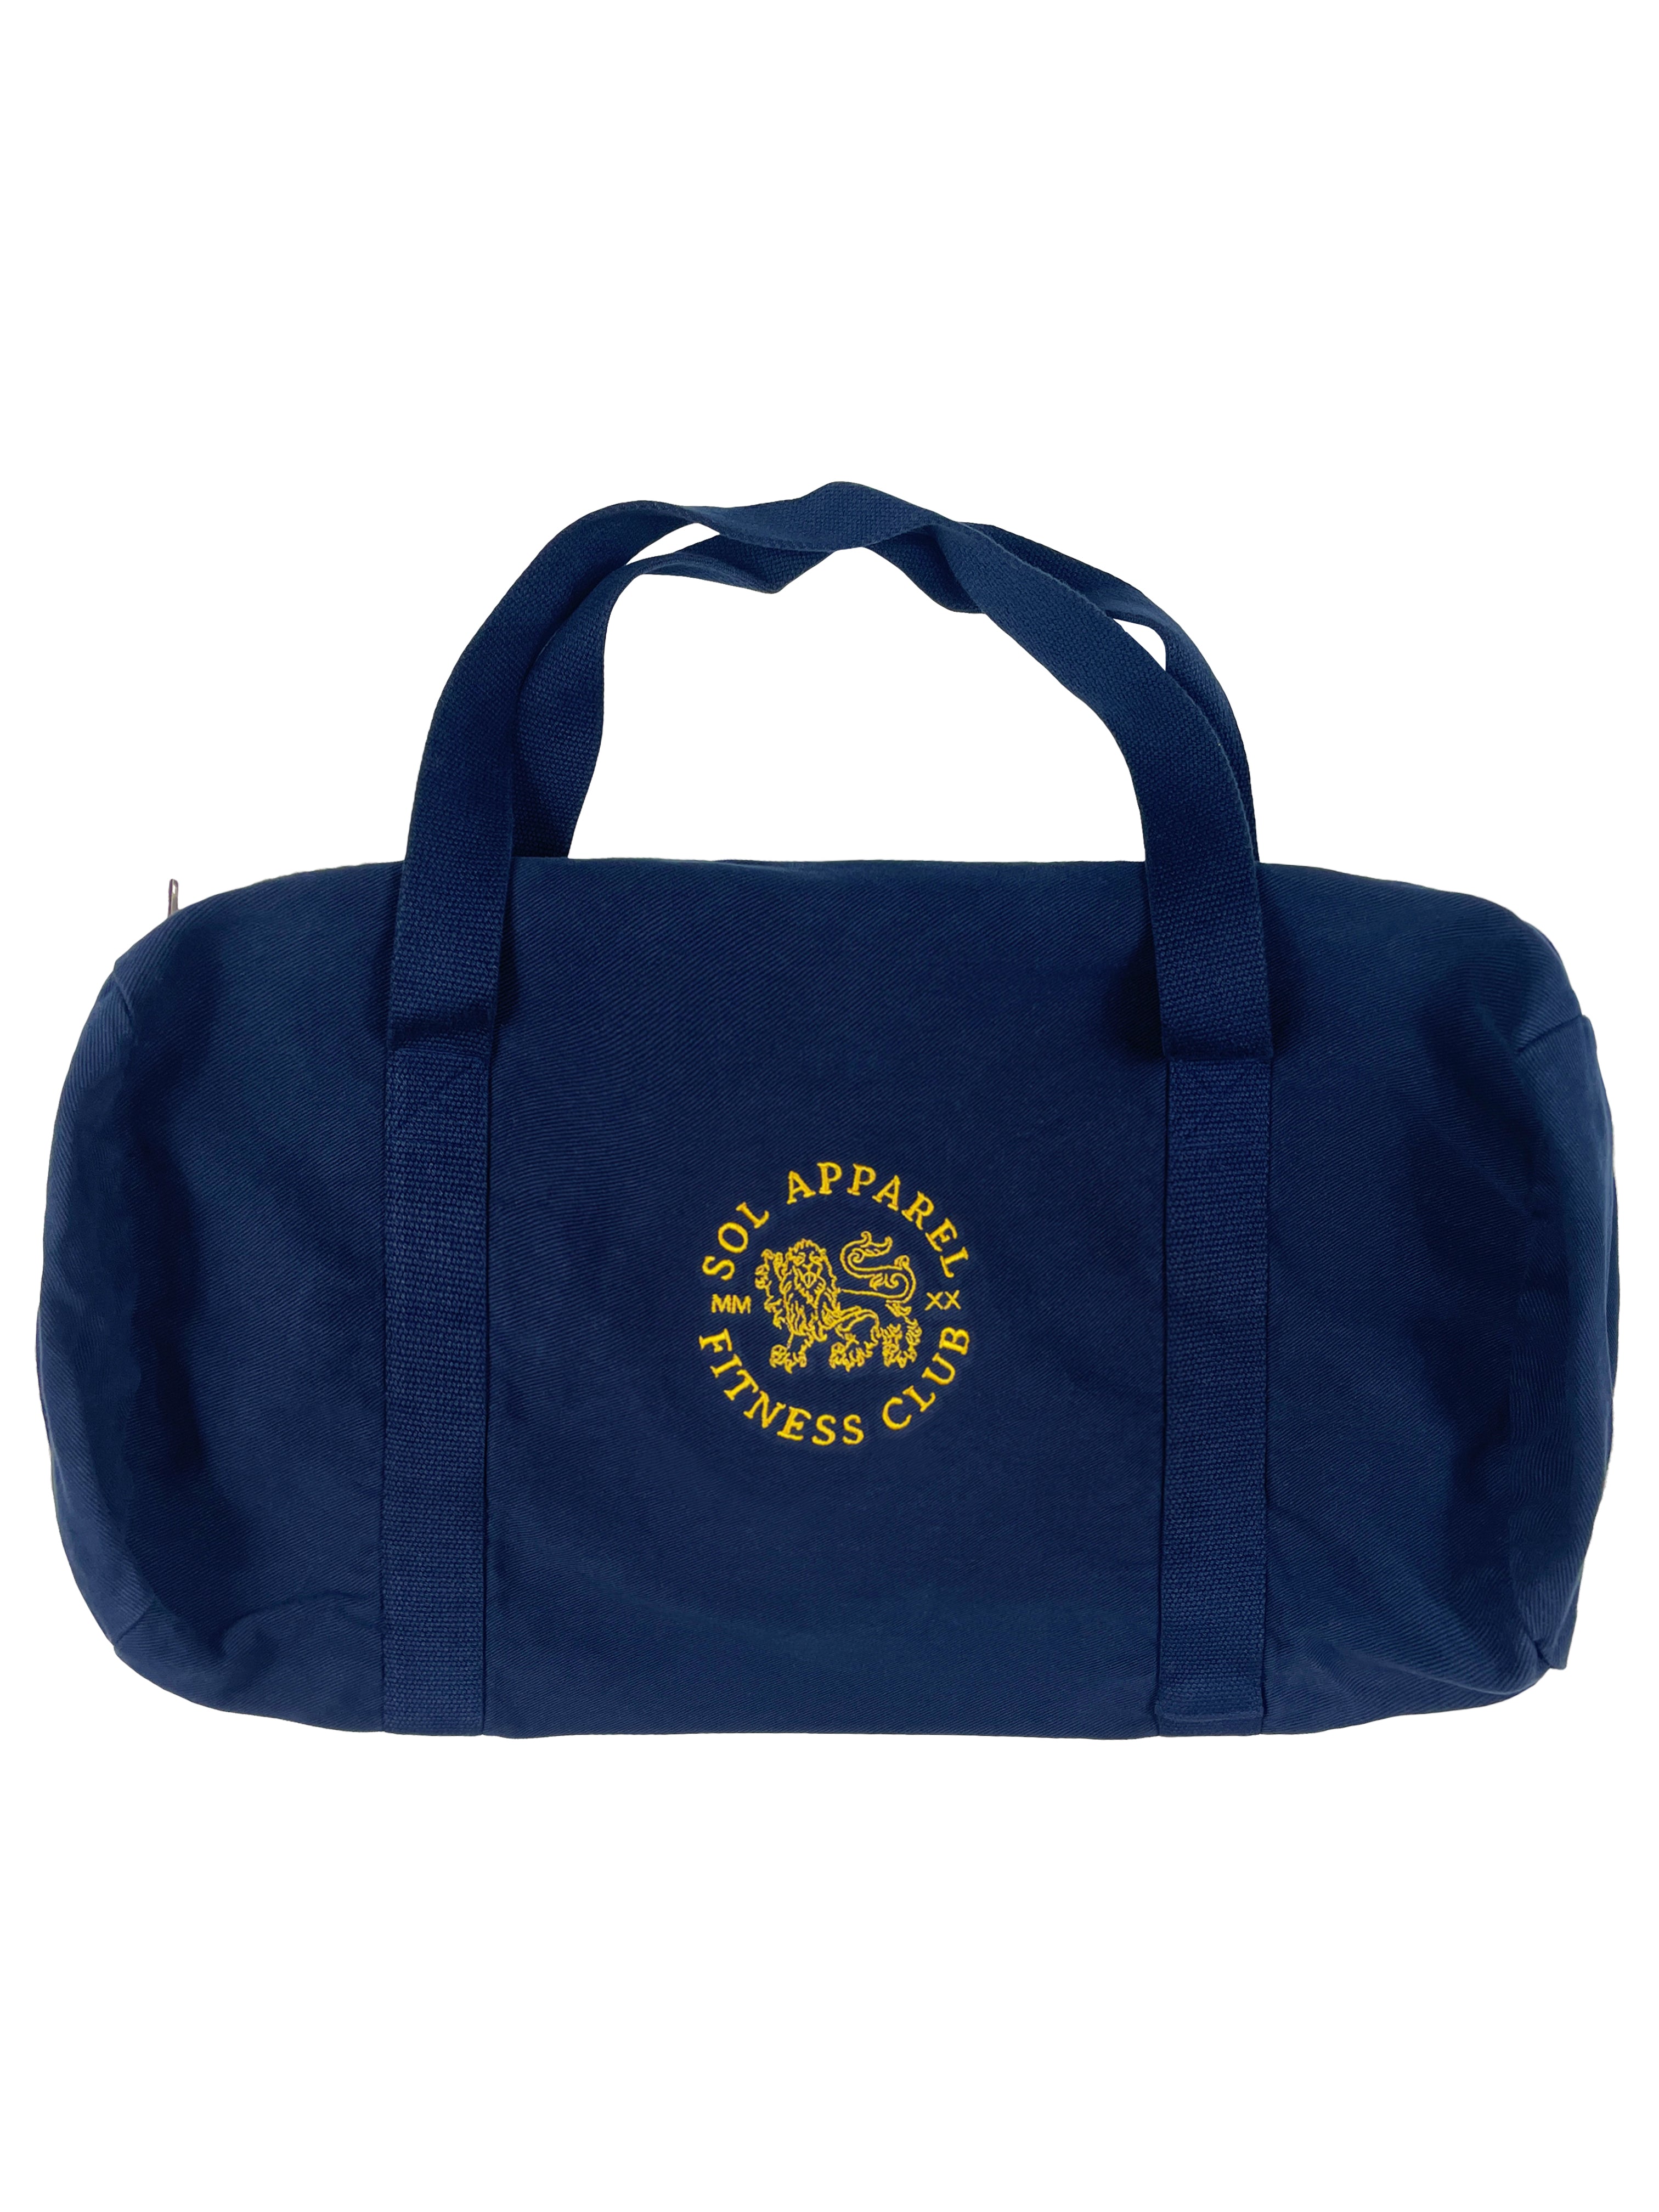 navy blue cotton duffel bag for gym with gold logo embroidered on the side of a lion and the text sol apparel fitness club